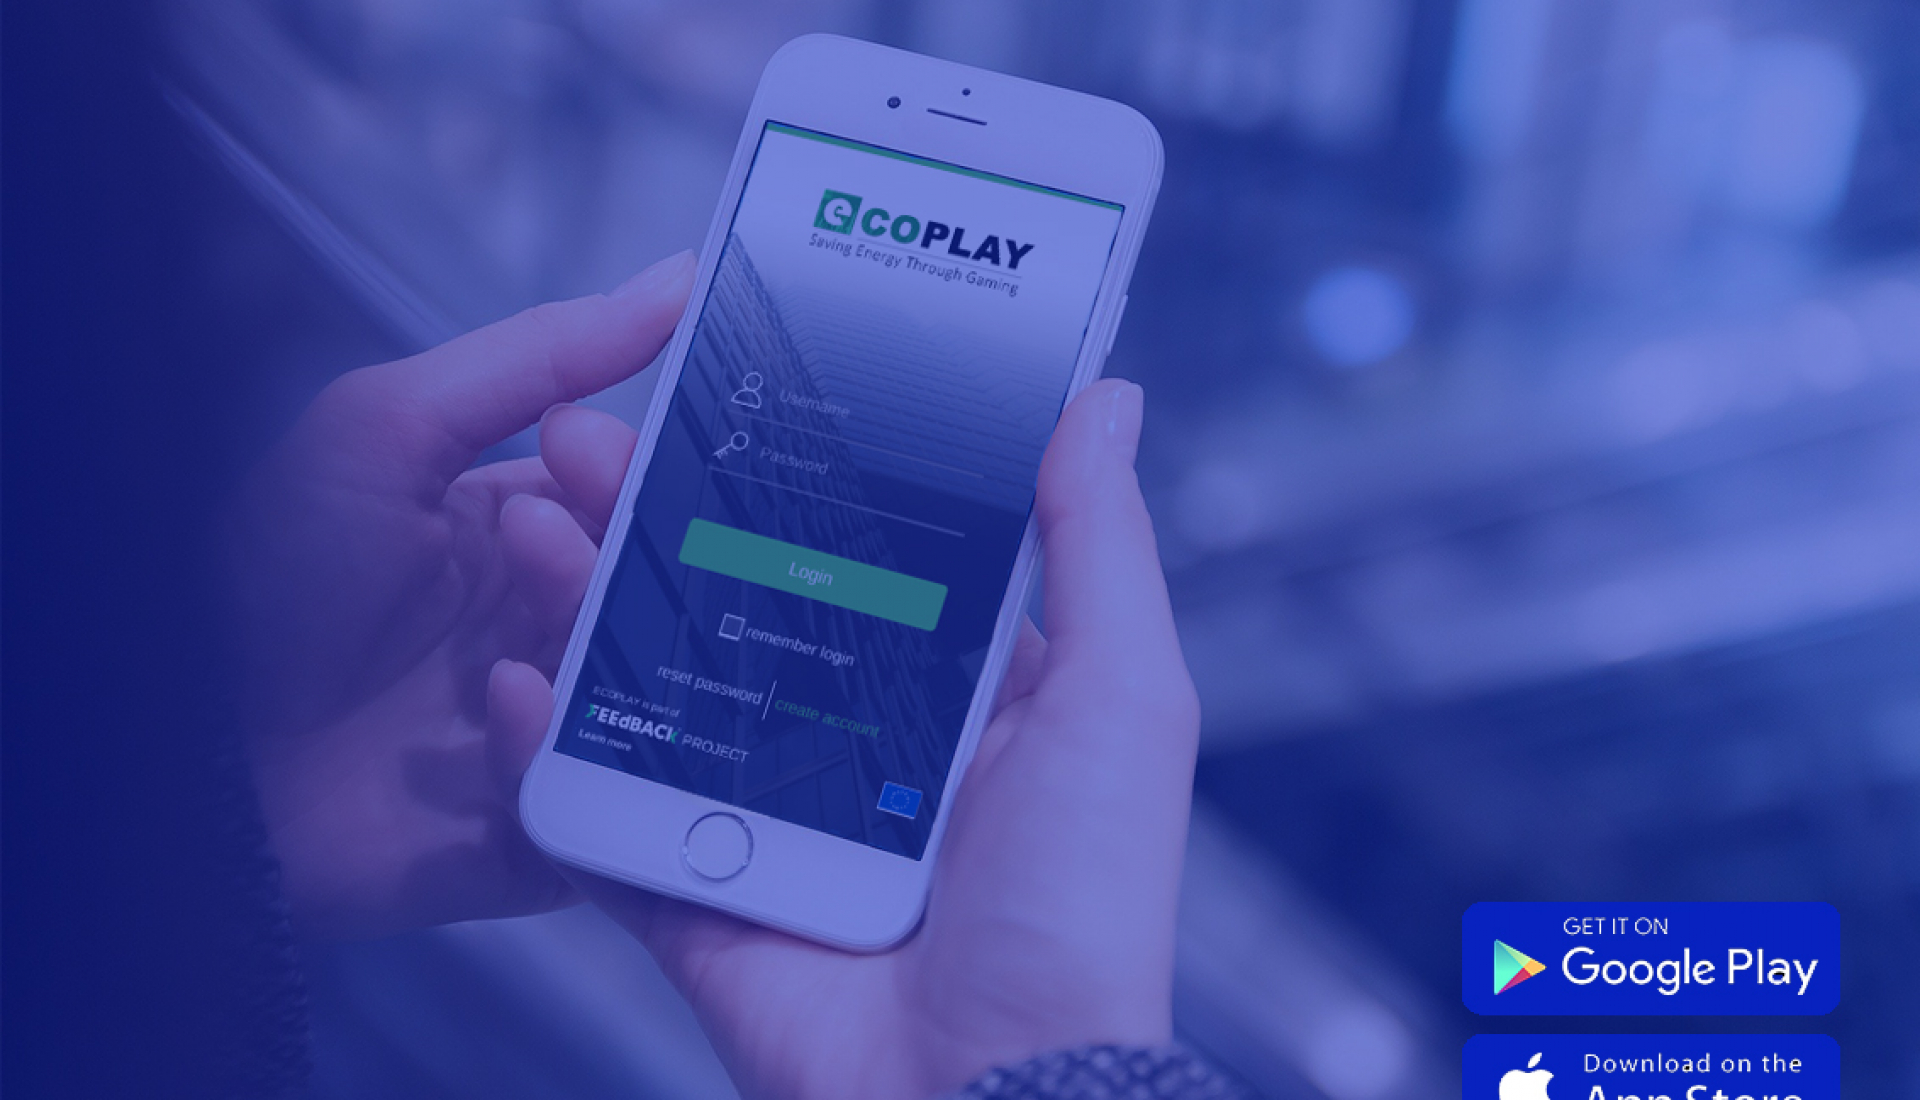 ecoplay:-the-mobile-application-that-helps-you-save-energy